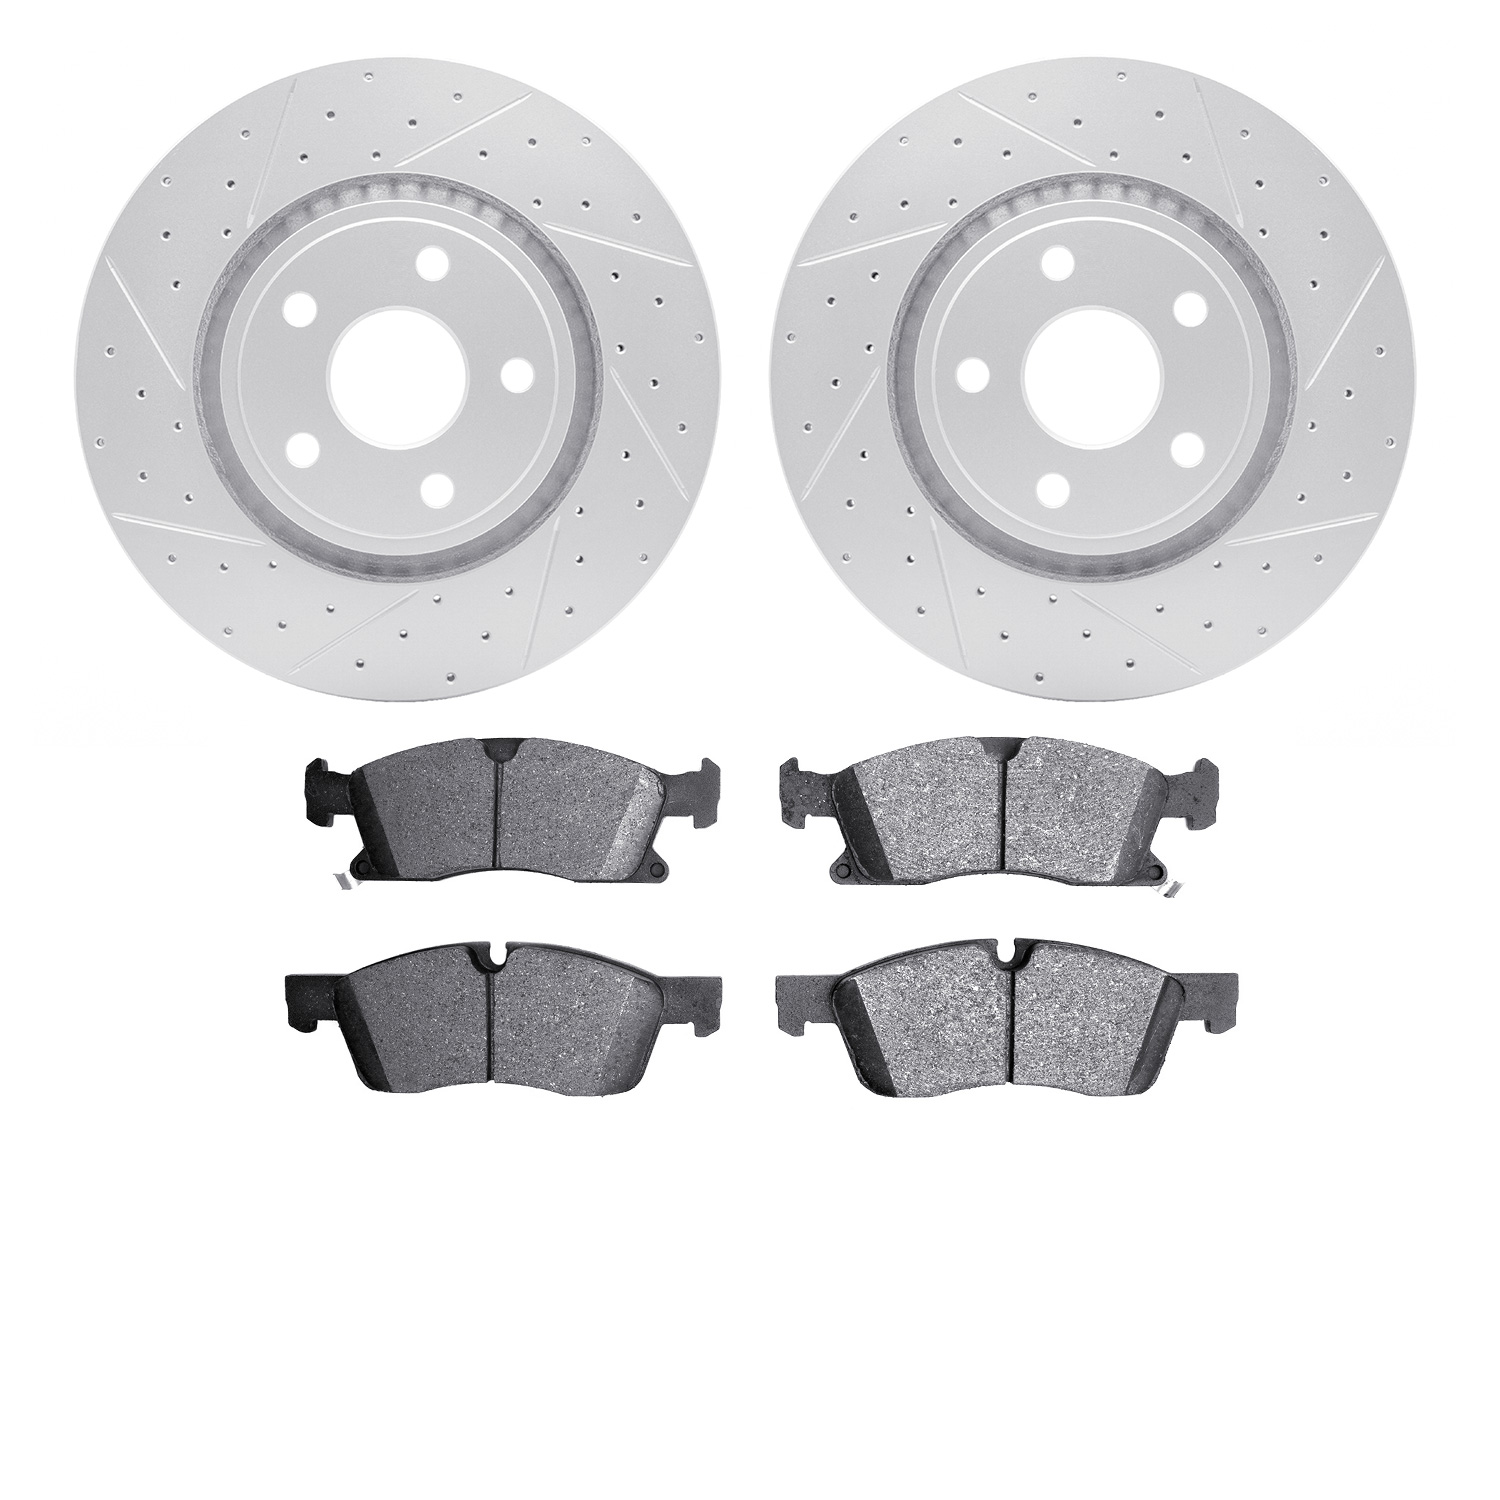 2402-42008 Geoperformance Drilled/Slotted Brake Rotors with Ultimate-Duty Brake Pads Kit, Fits Select Mopar, Position: Front